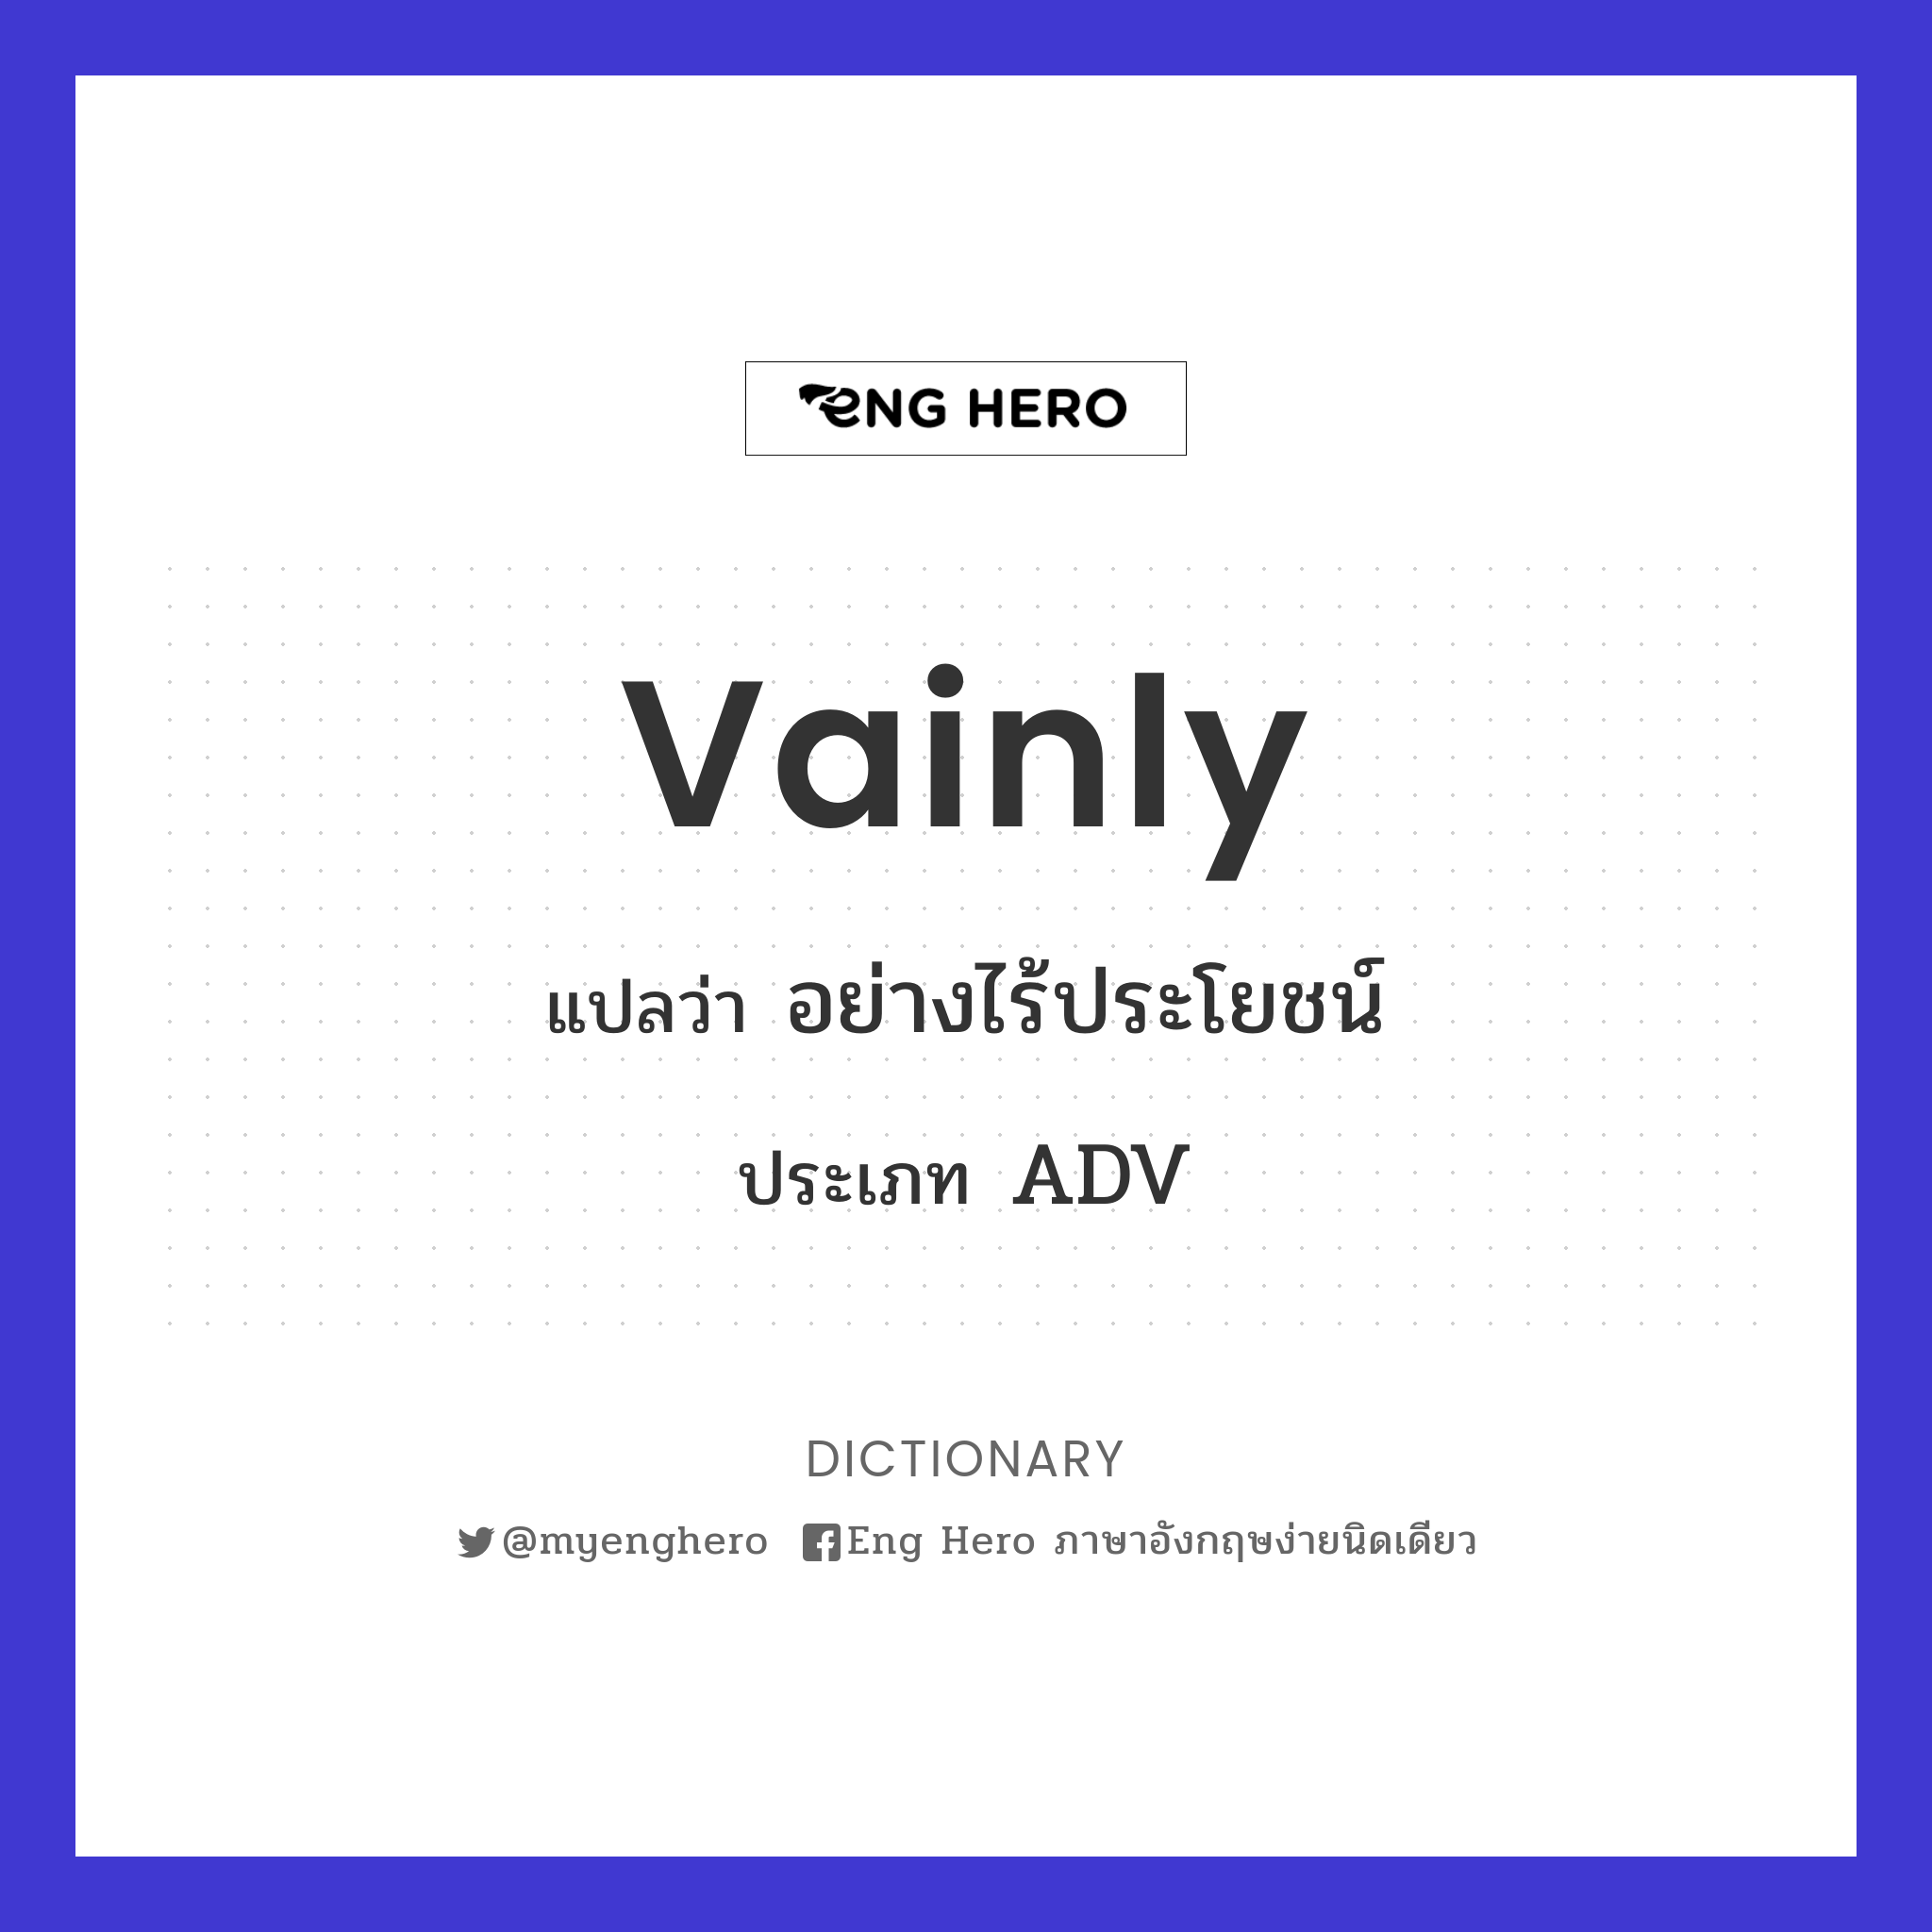 vainly